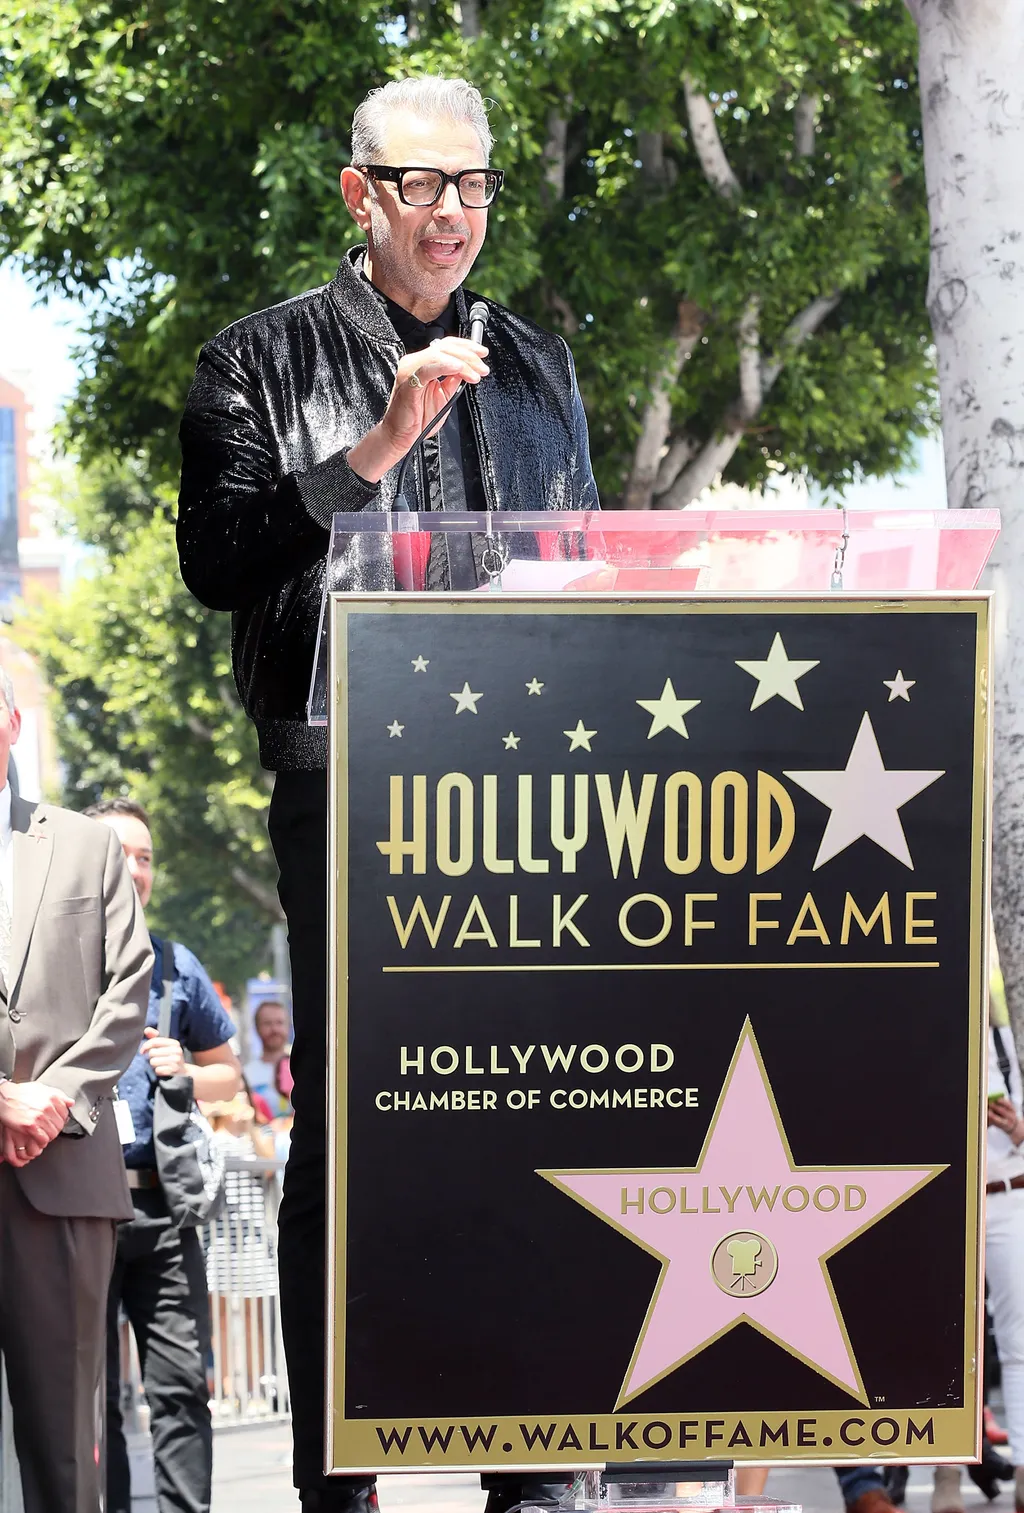 Jeff Goldblum Honored With Star On The Hollywood Walk Of Fame Arts Culture and Entertainment Celebrities Hollywood FeedRouted_NorthAmerica attends Jeff Goldblum being honored with a Star on the Hollywood Walk of Fame on June 14, 2018 in Hollywood, Califor